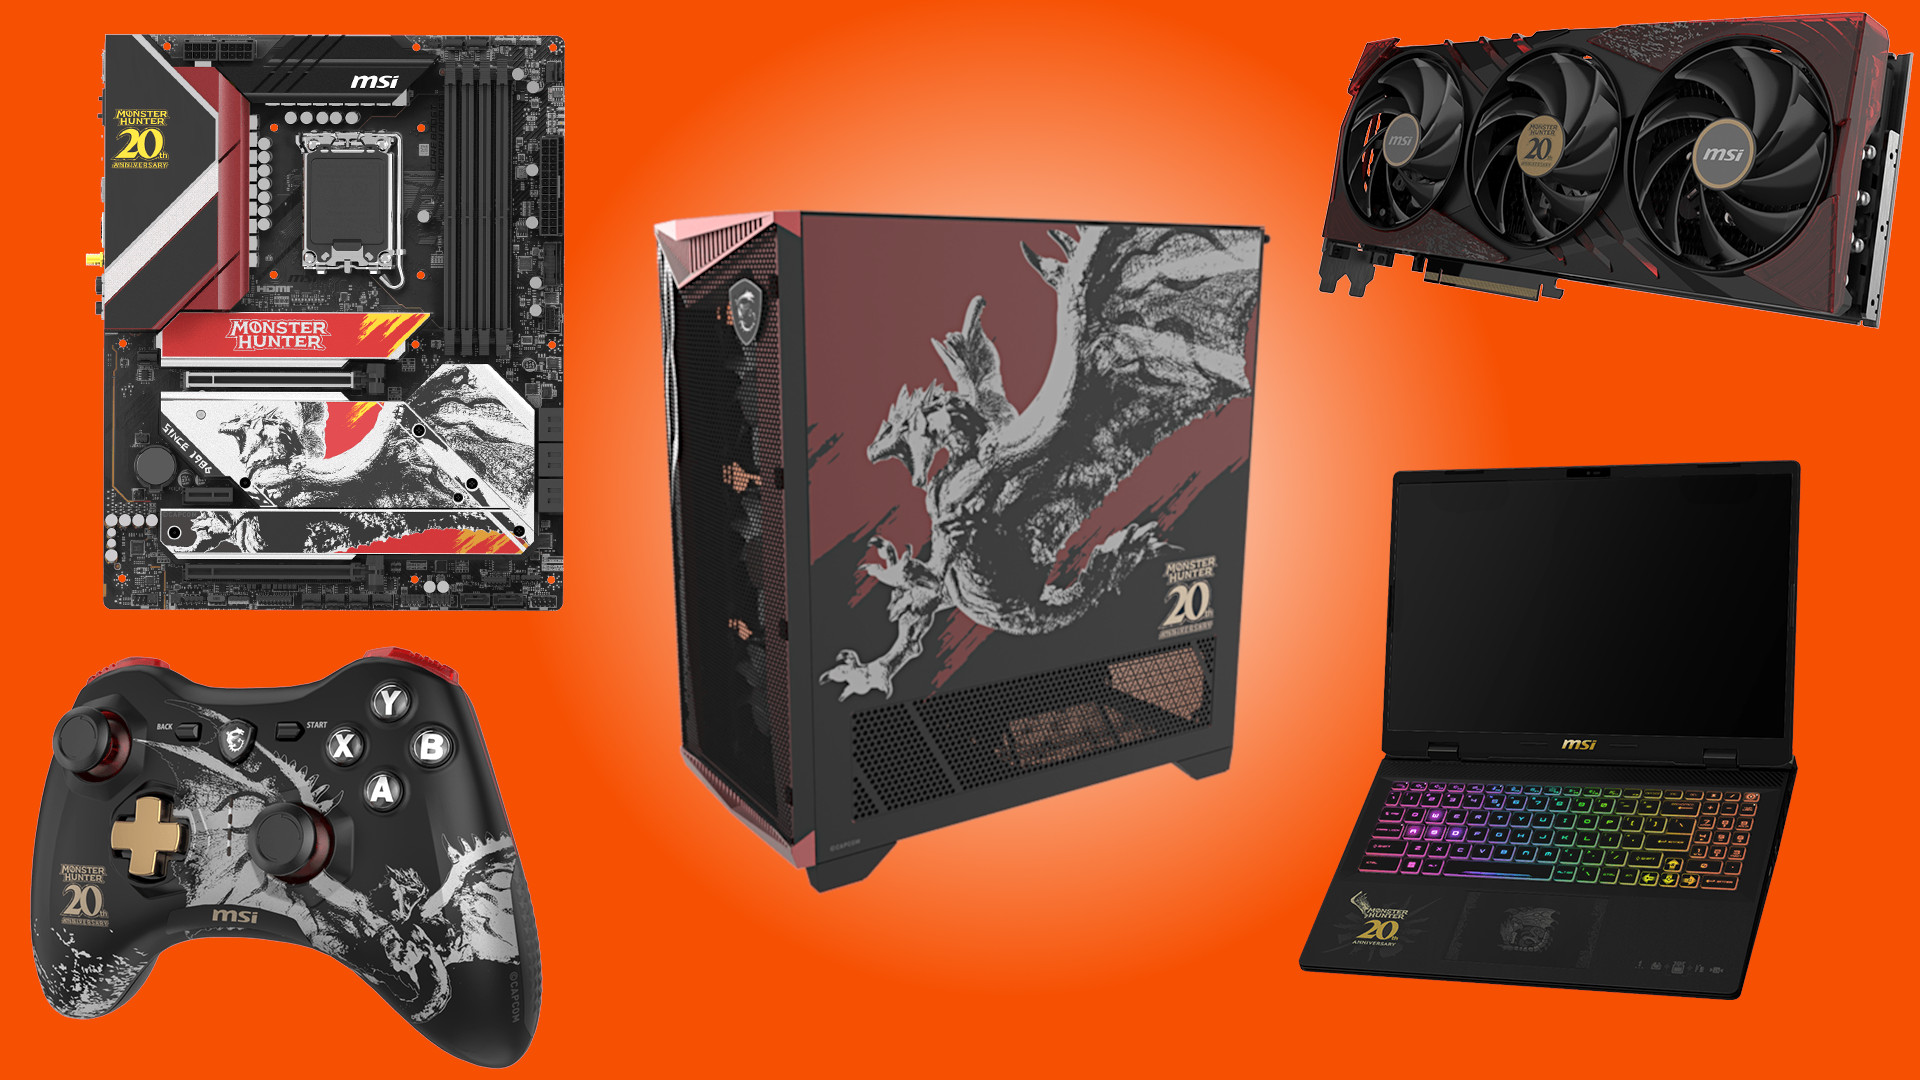 De MSI Monster Hunter Limited Edition-collectie is absoluut schitterend